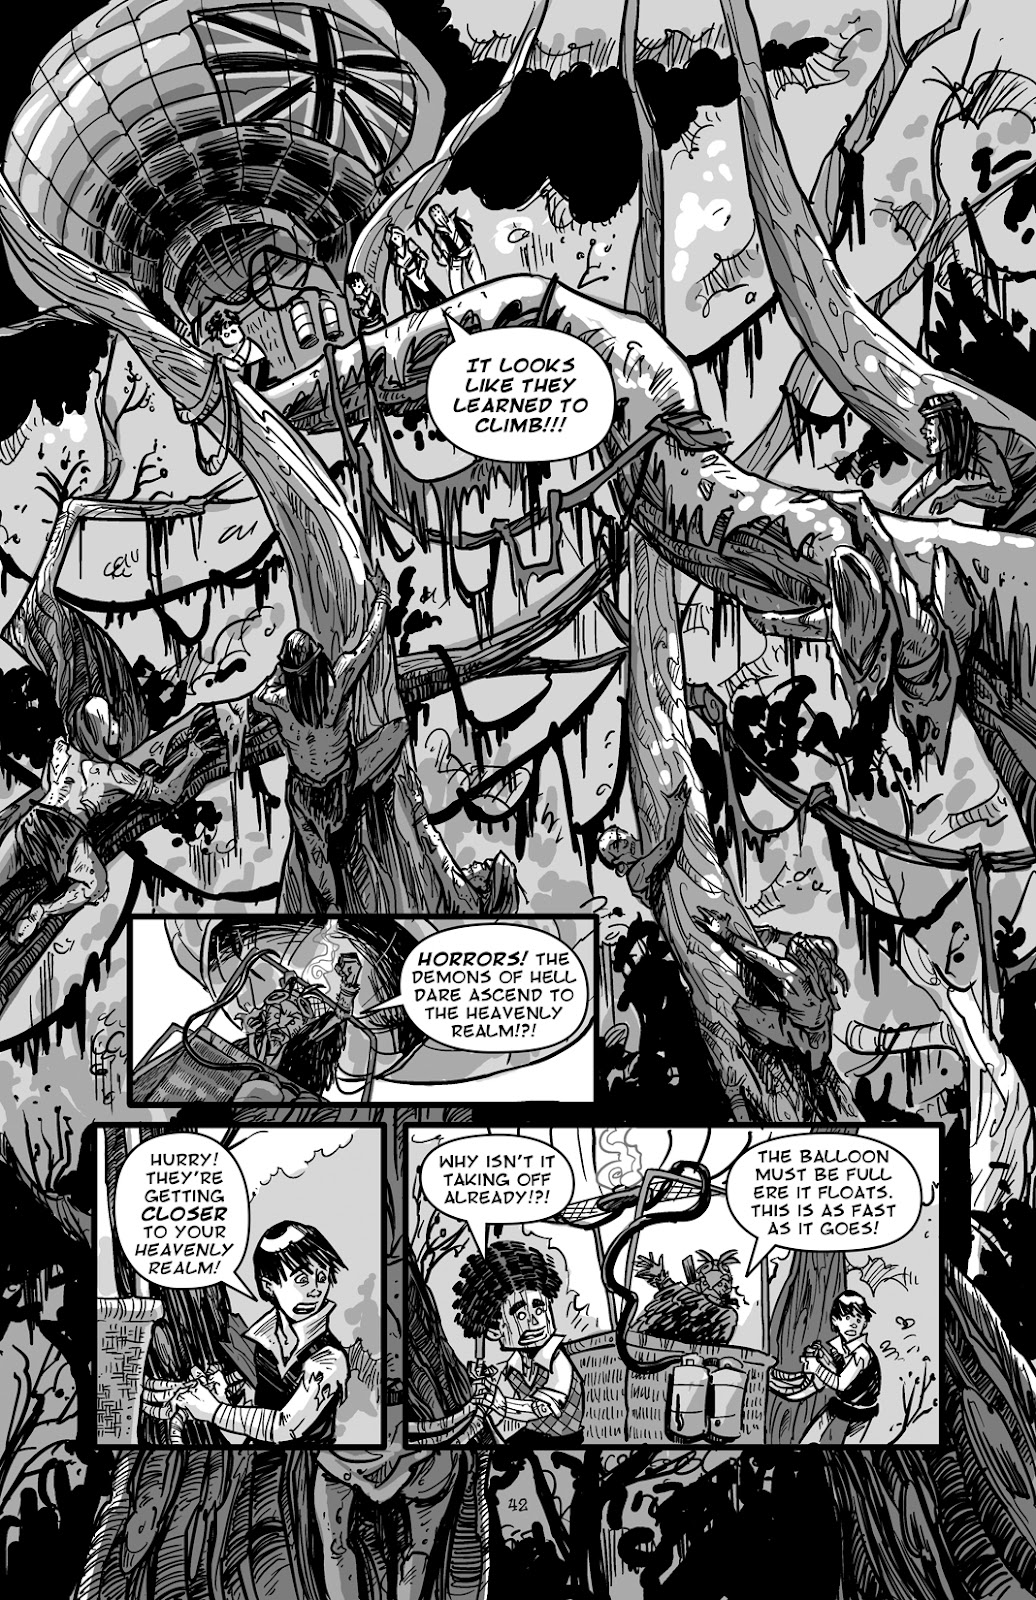 Pinocchio: Vampire Slayer - Of Wood and Blood issue 2 - Page 16